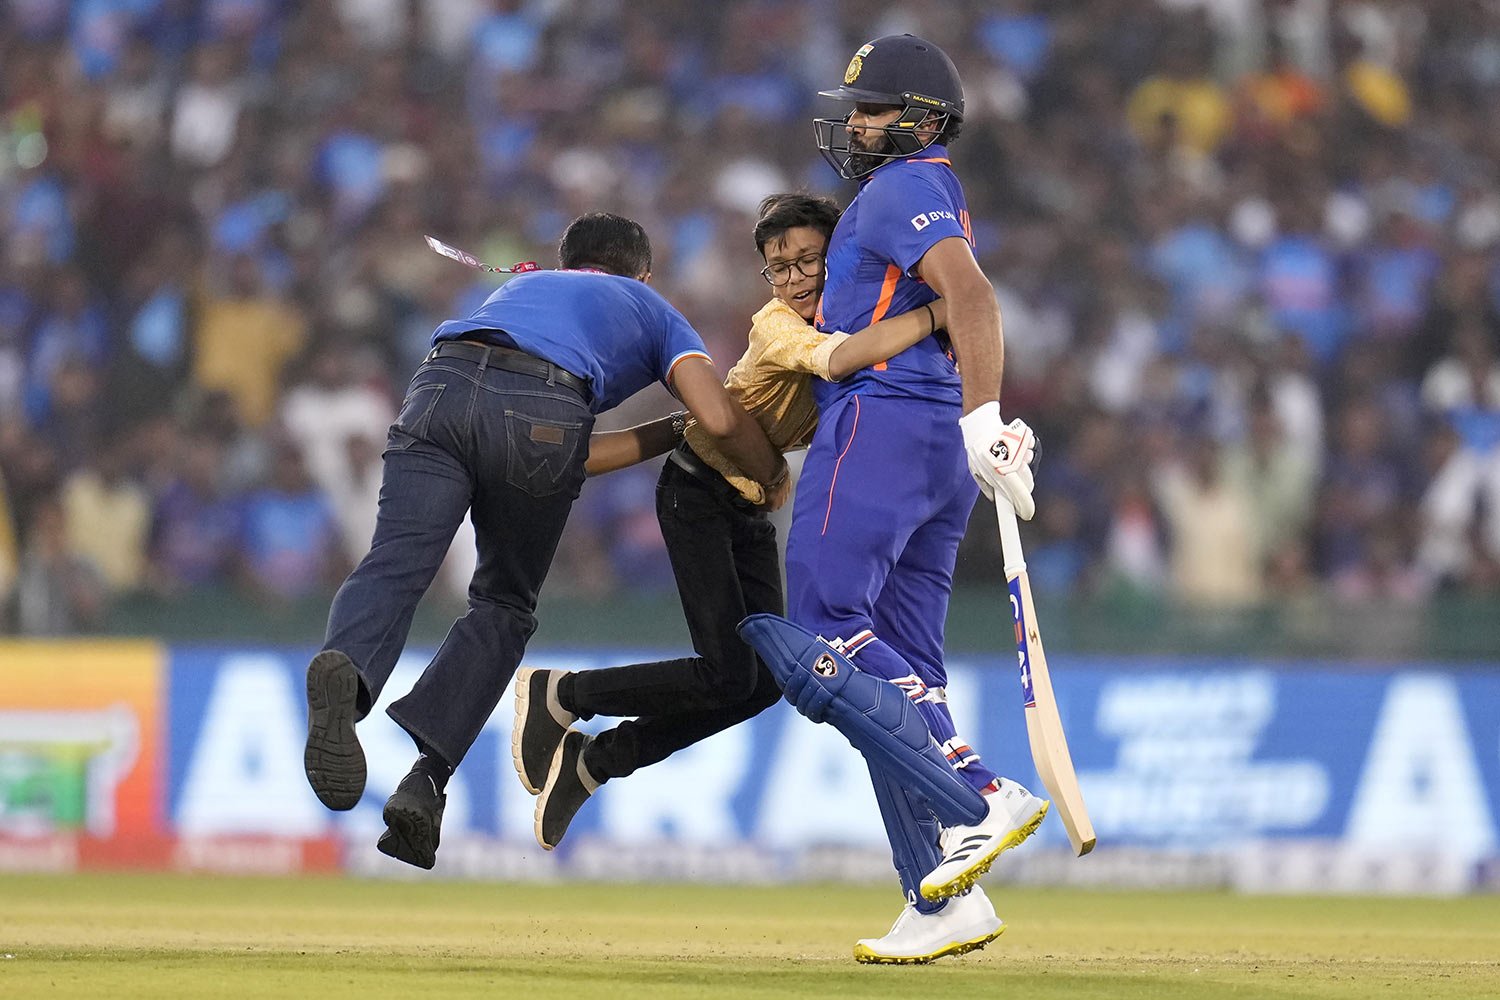  A security guard grabs a boy who invaded the field to hug India's captain Rohit Sharma, during the second one-day international cricket match against New Zealand, in Raipur, India, Jan. 21, 2023. (AP Photo/Aijaz Rahi) 